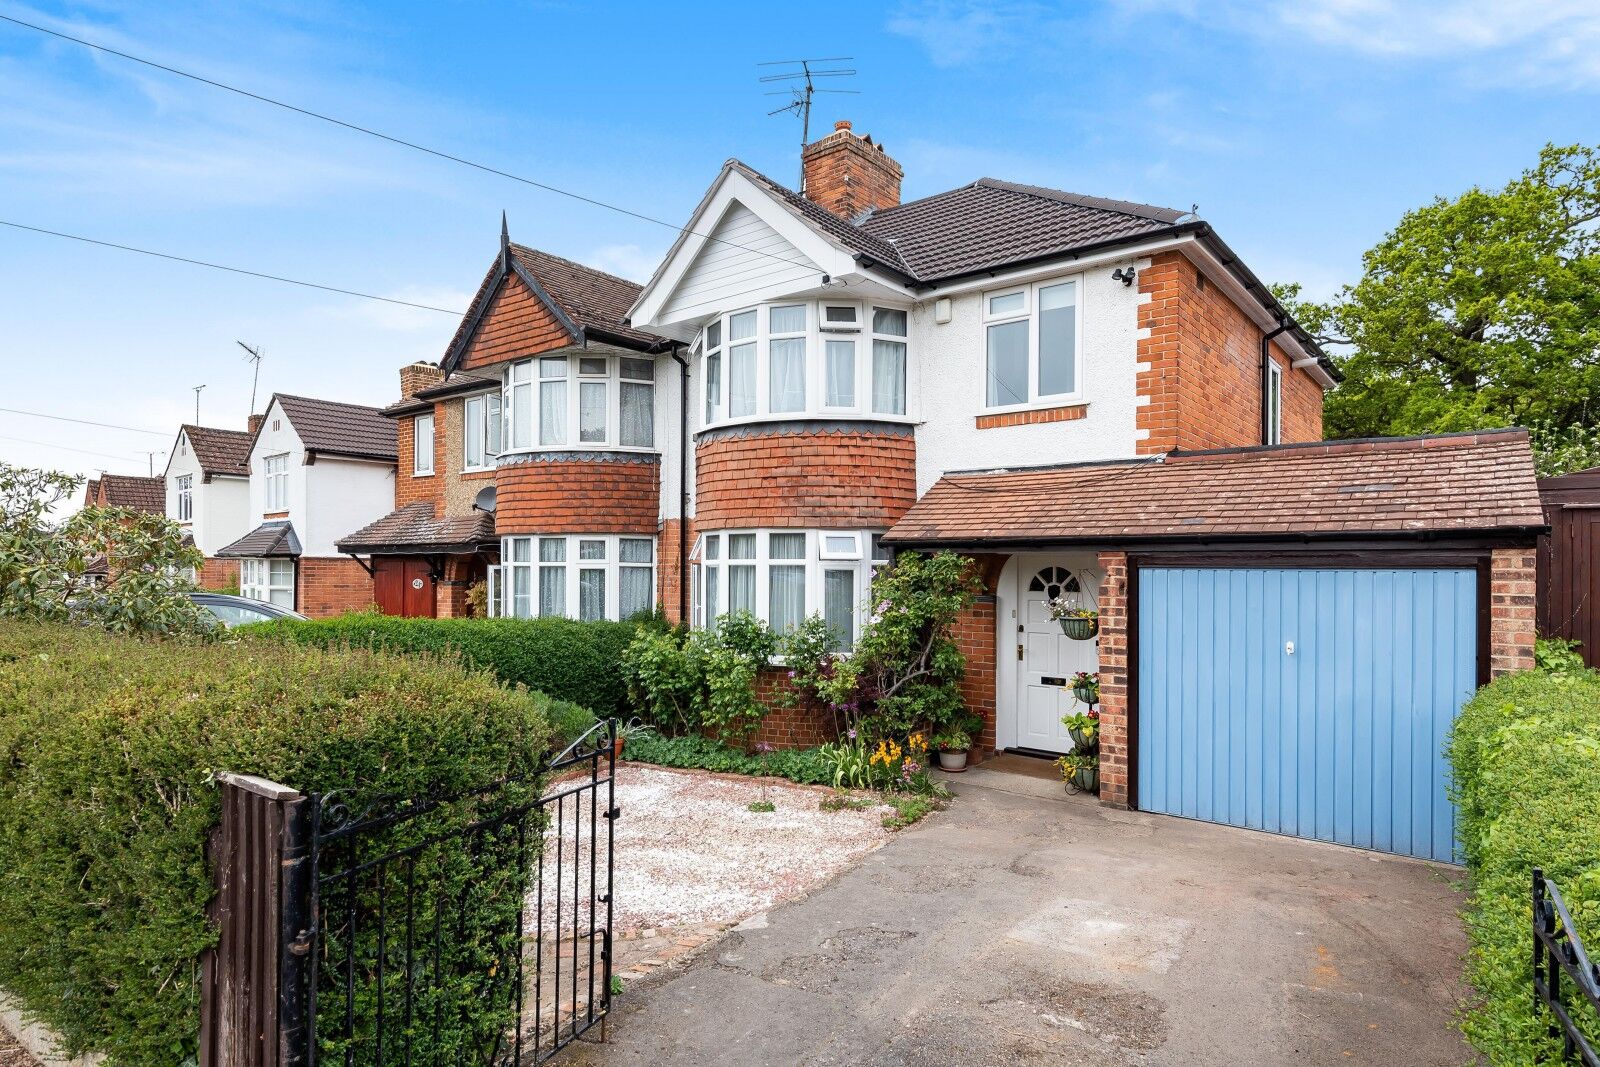 3 bedroom semi detached house for sale Stanhope Road, Reading, RG2, main image